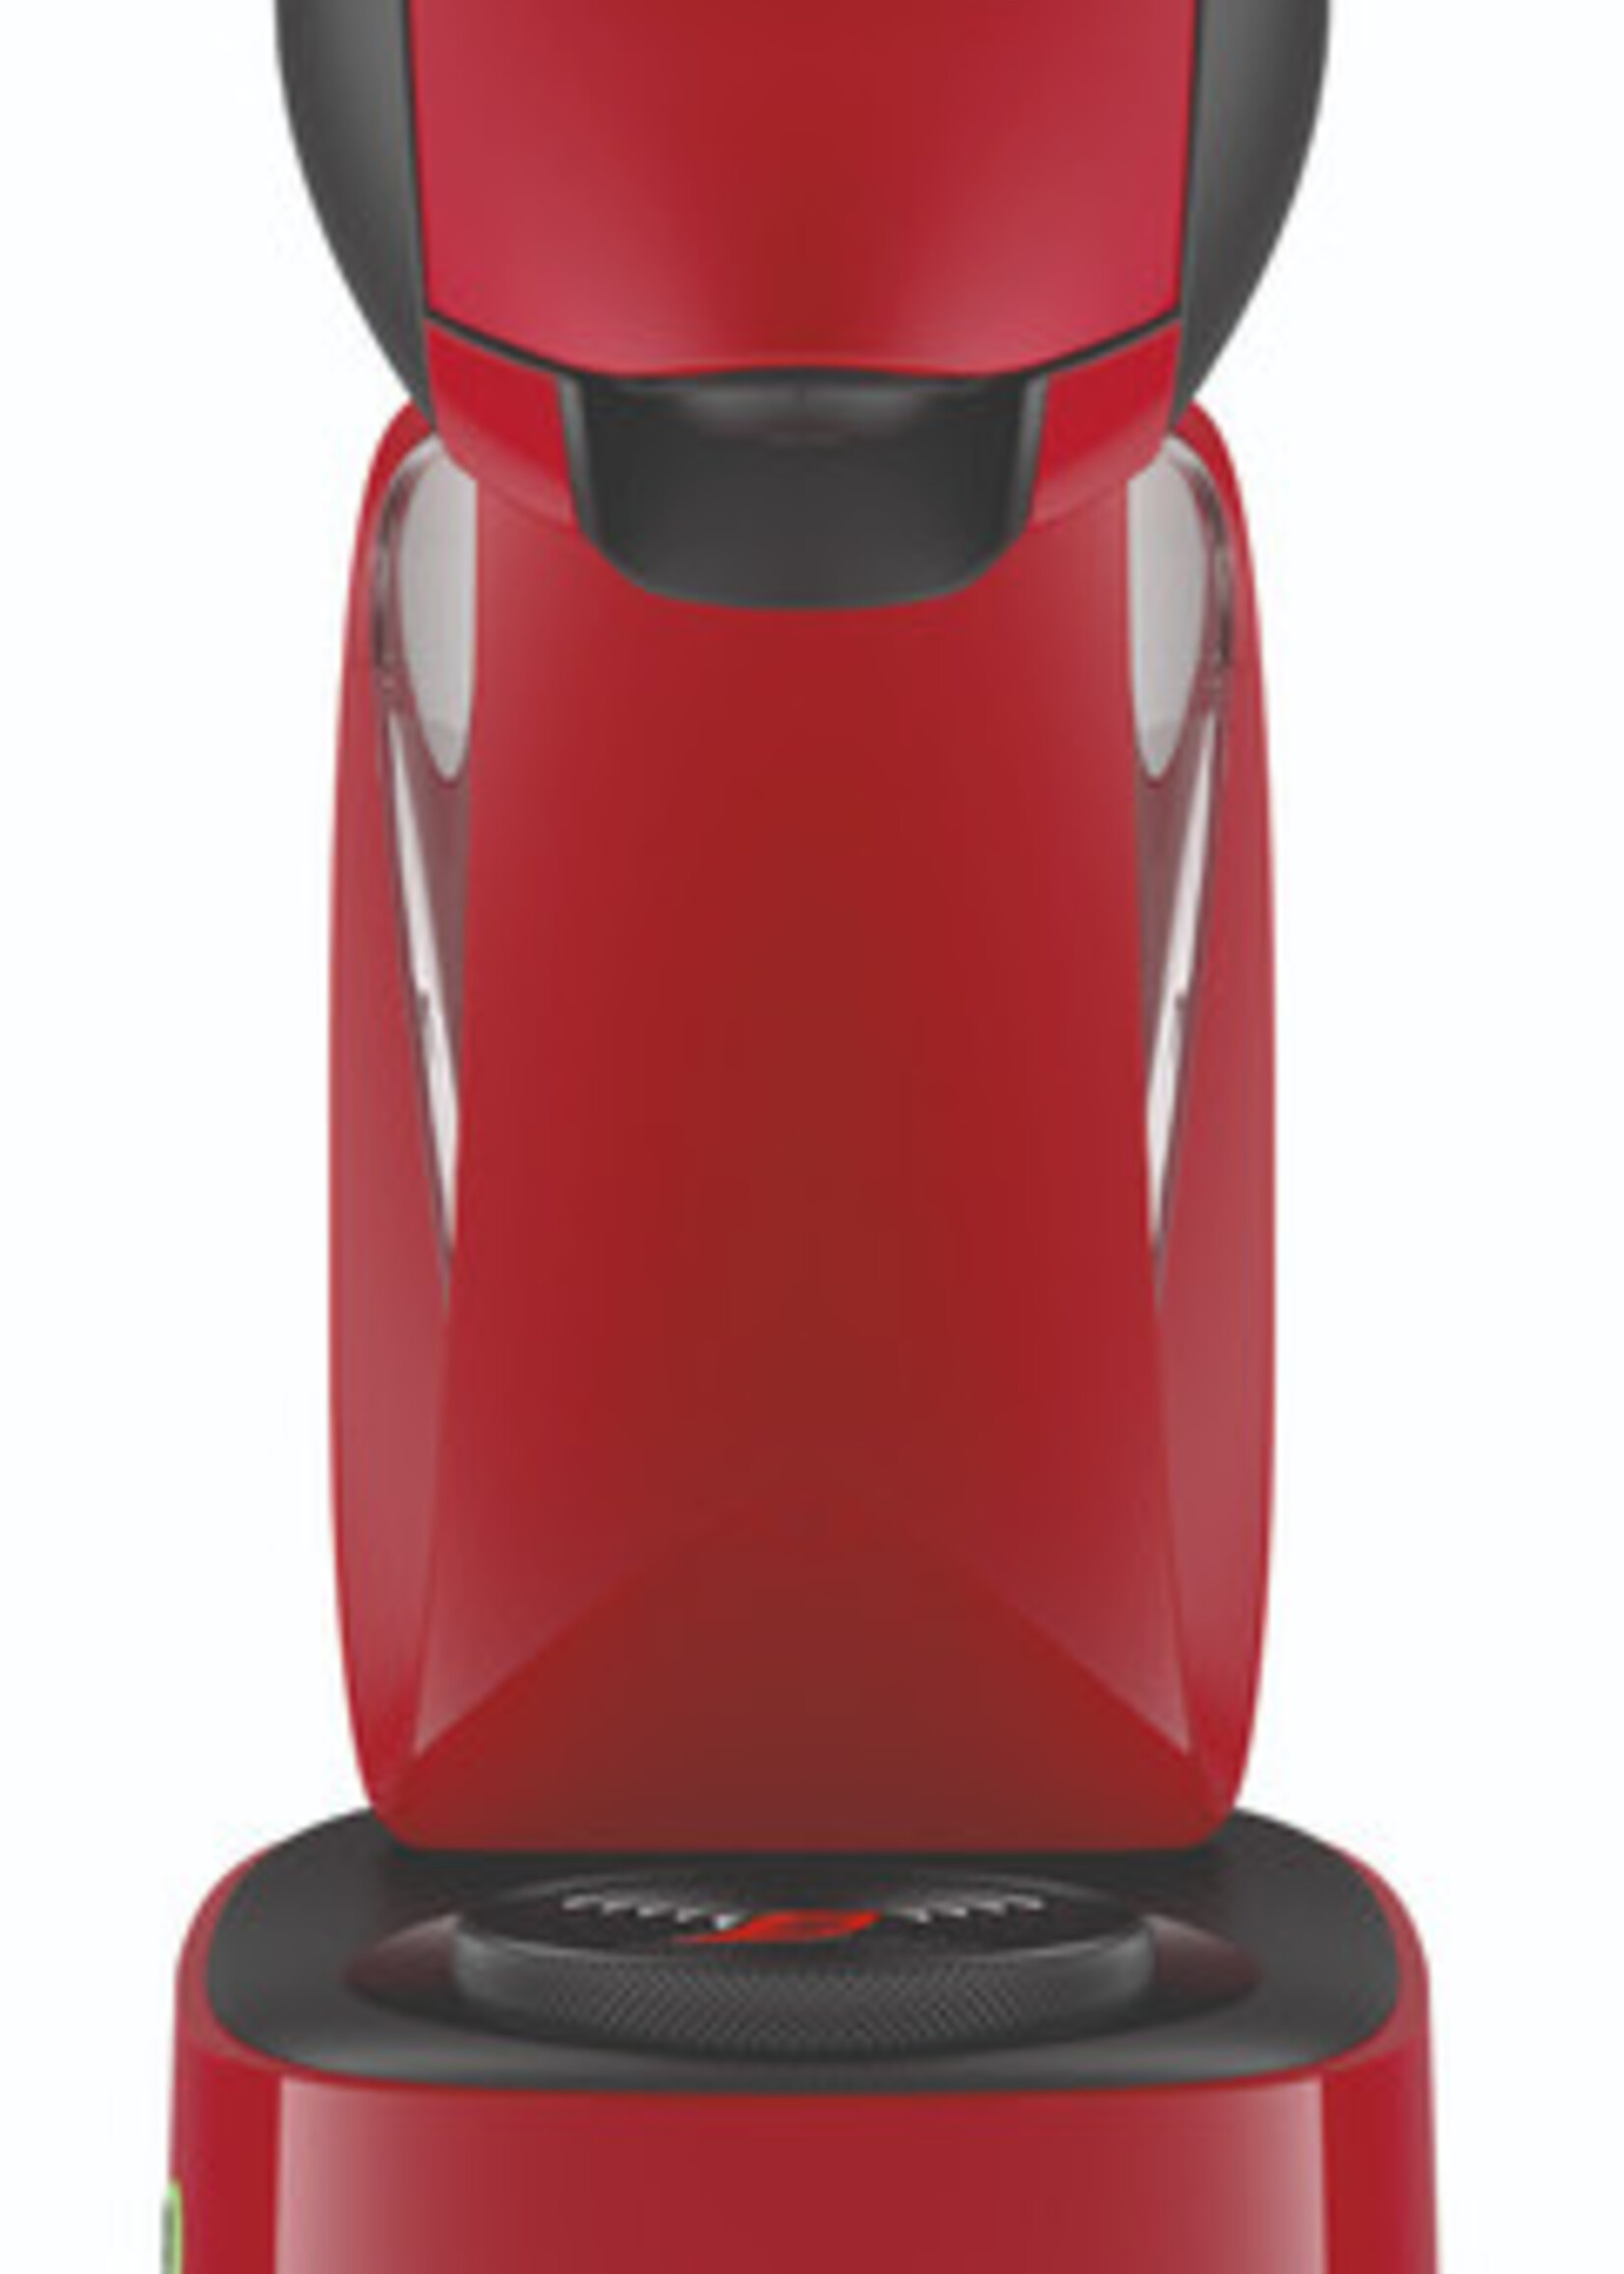 Krups Dolce Gusto Infinissima KP1705 - Koffiemachine